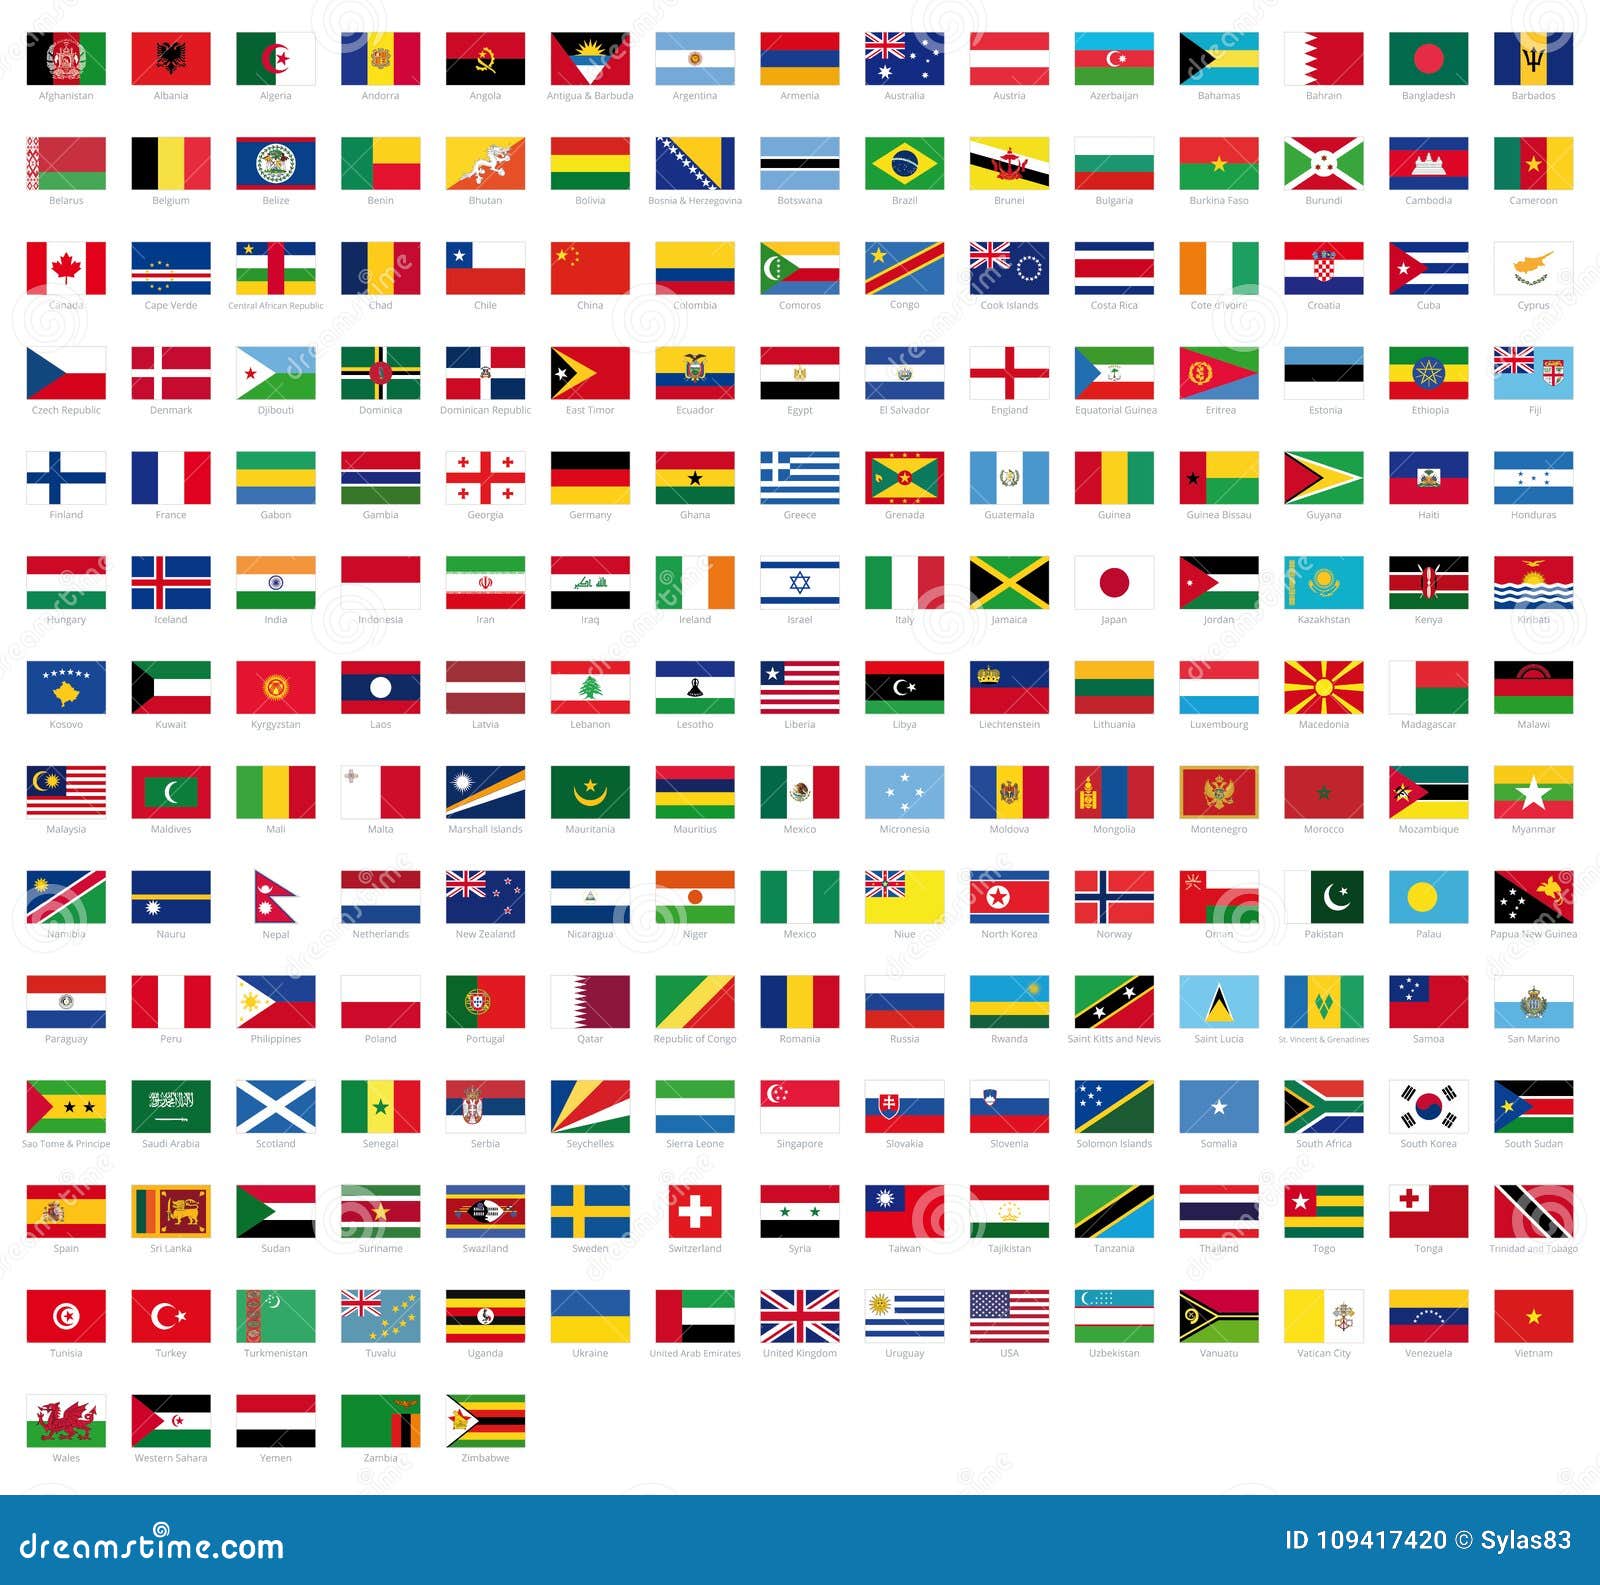 All National Flags Of The World With Names High Quality Vector Flag Isolated On White Background Stock Vector Illustration Of Africa Geography